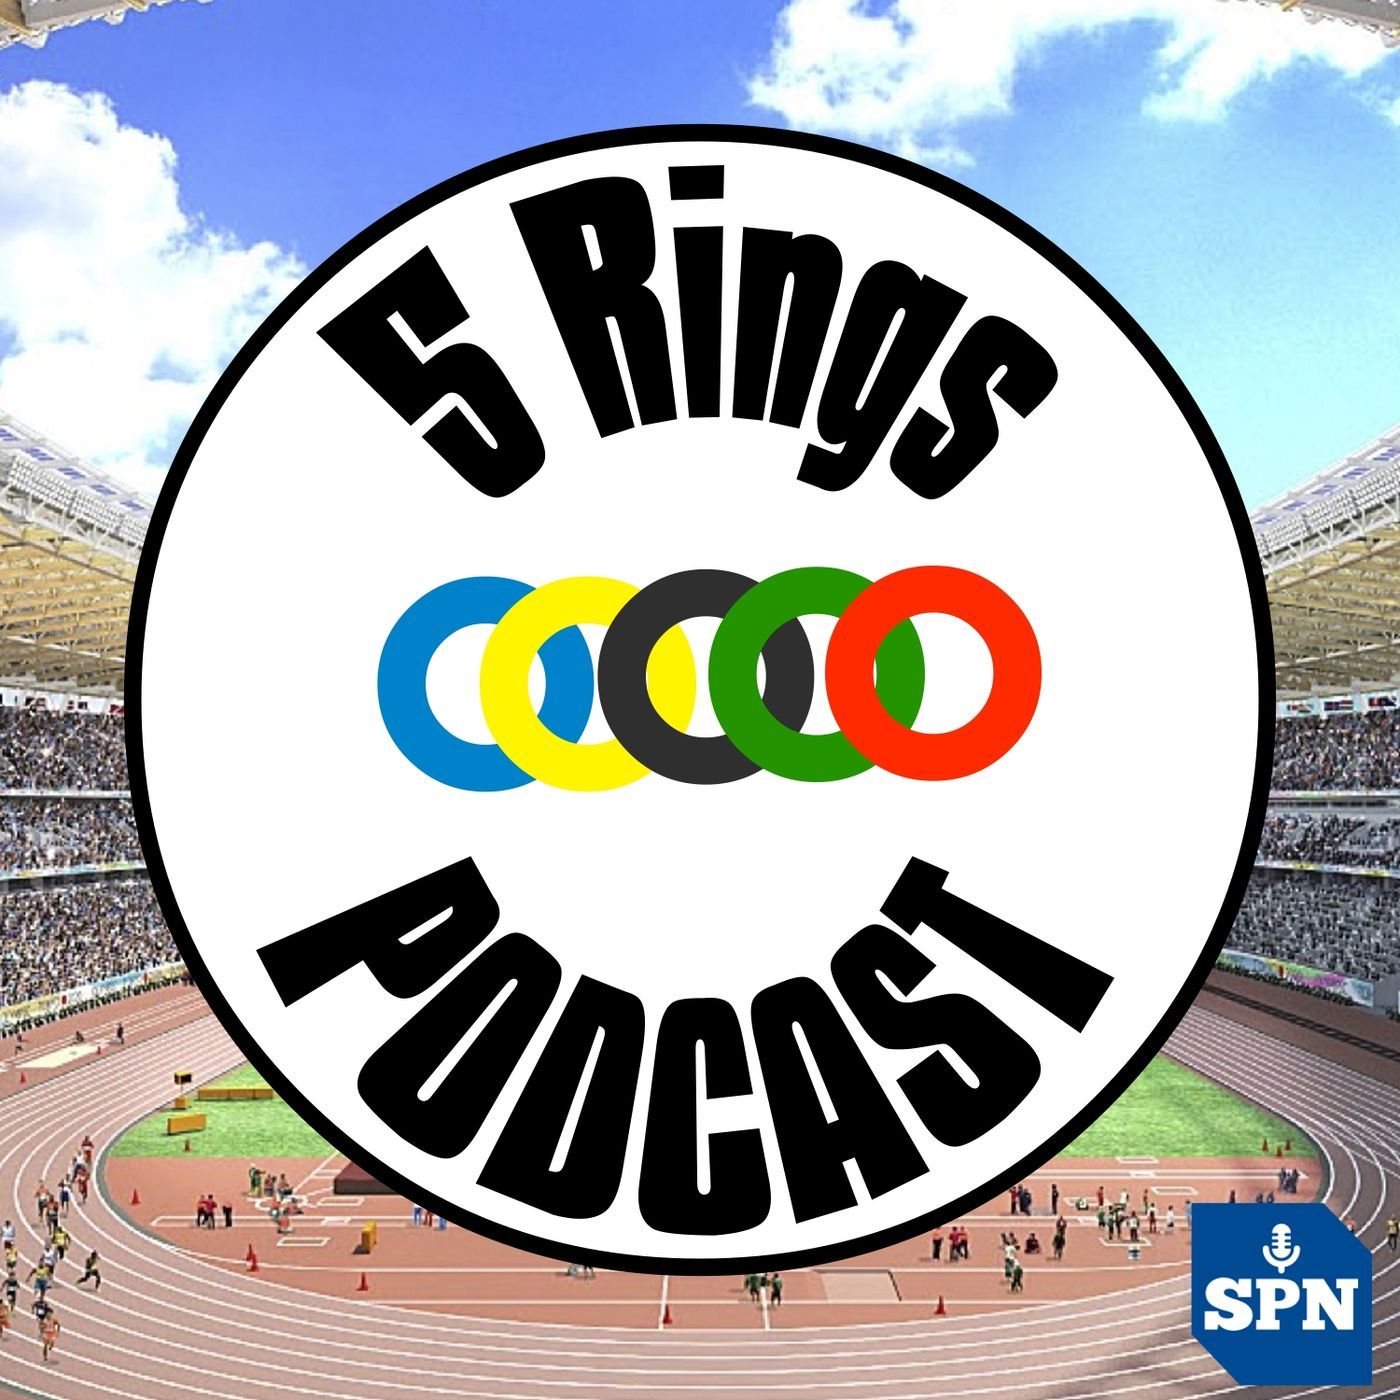 5 Rings Podcast - Daily Coverage of Tokyo 2020 with Kevin Laramee and Duane Rollins - Day 6 Review